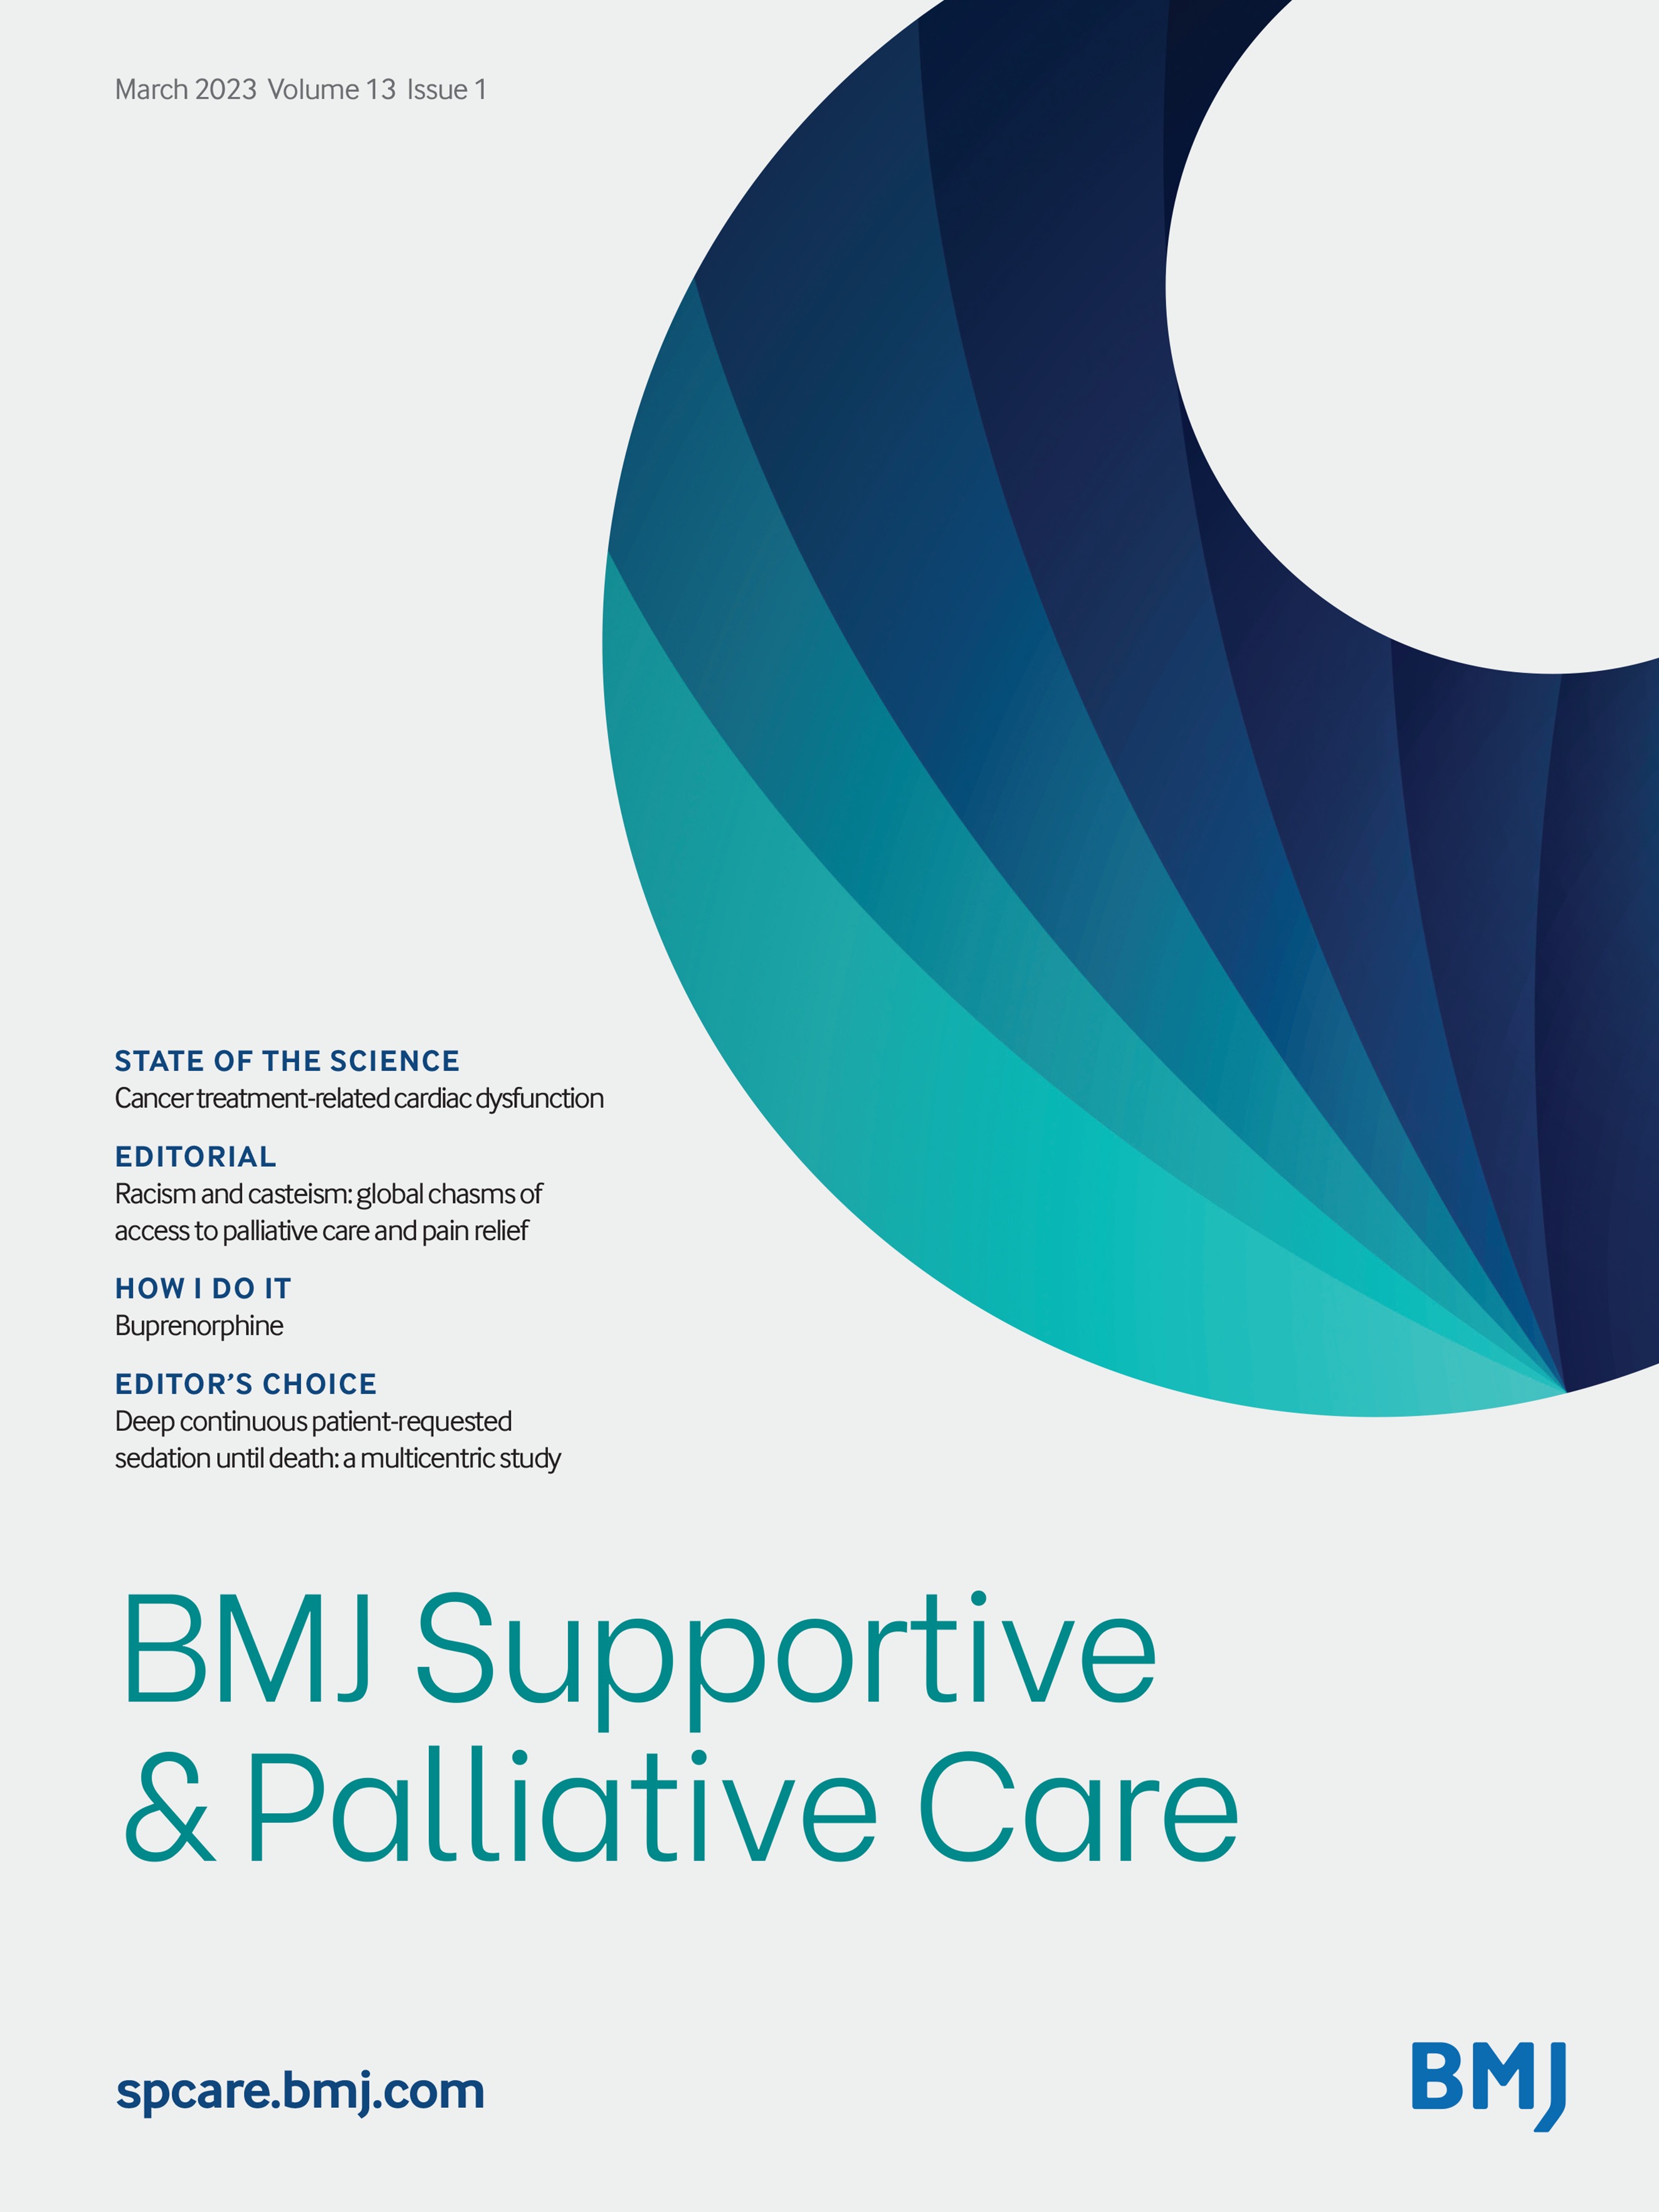 Palliative care from the perspective of cancer physicians: a qualitative semistructured interviews study